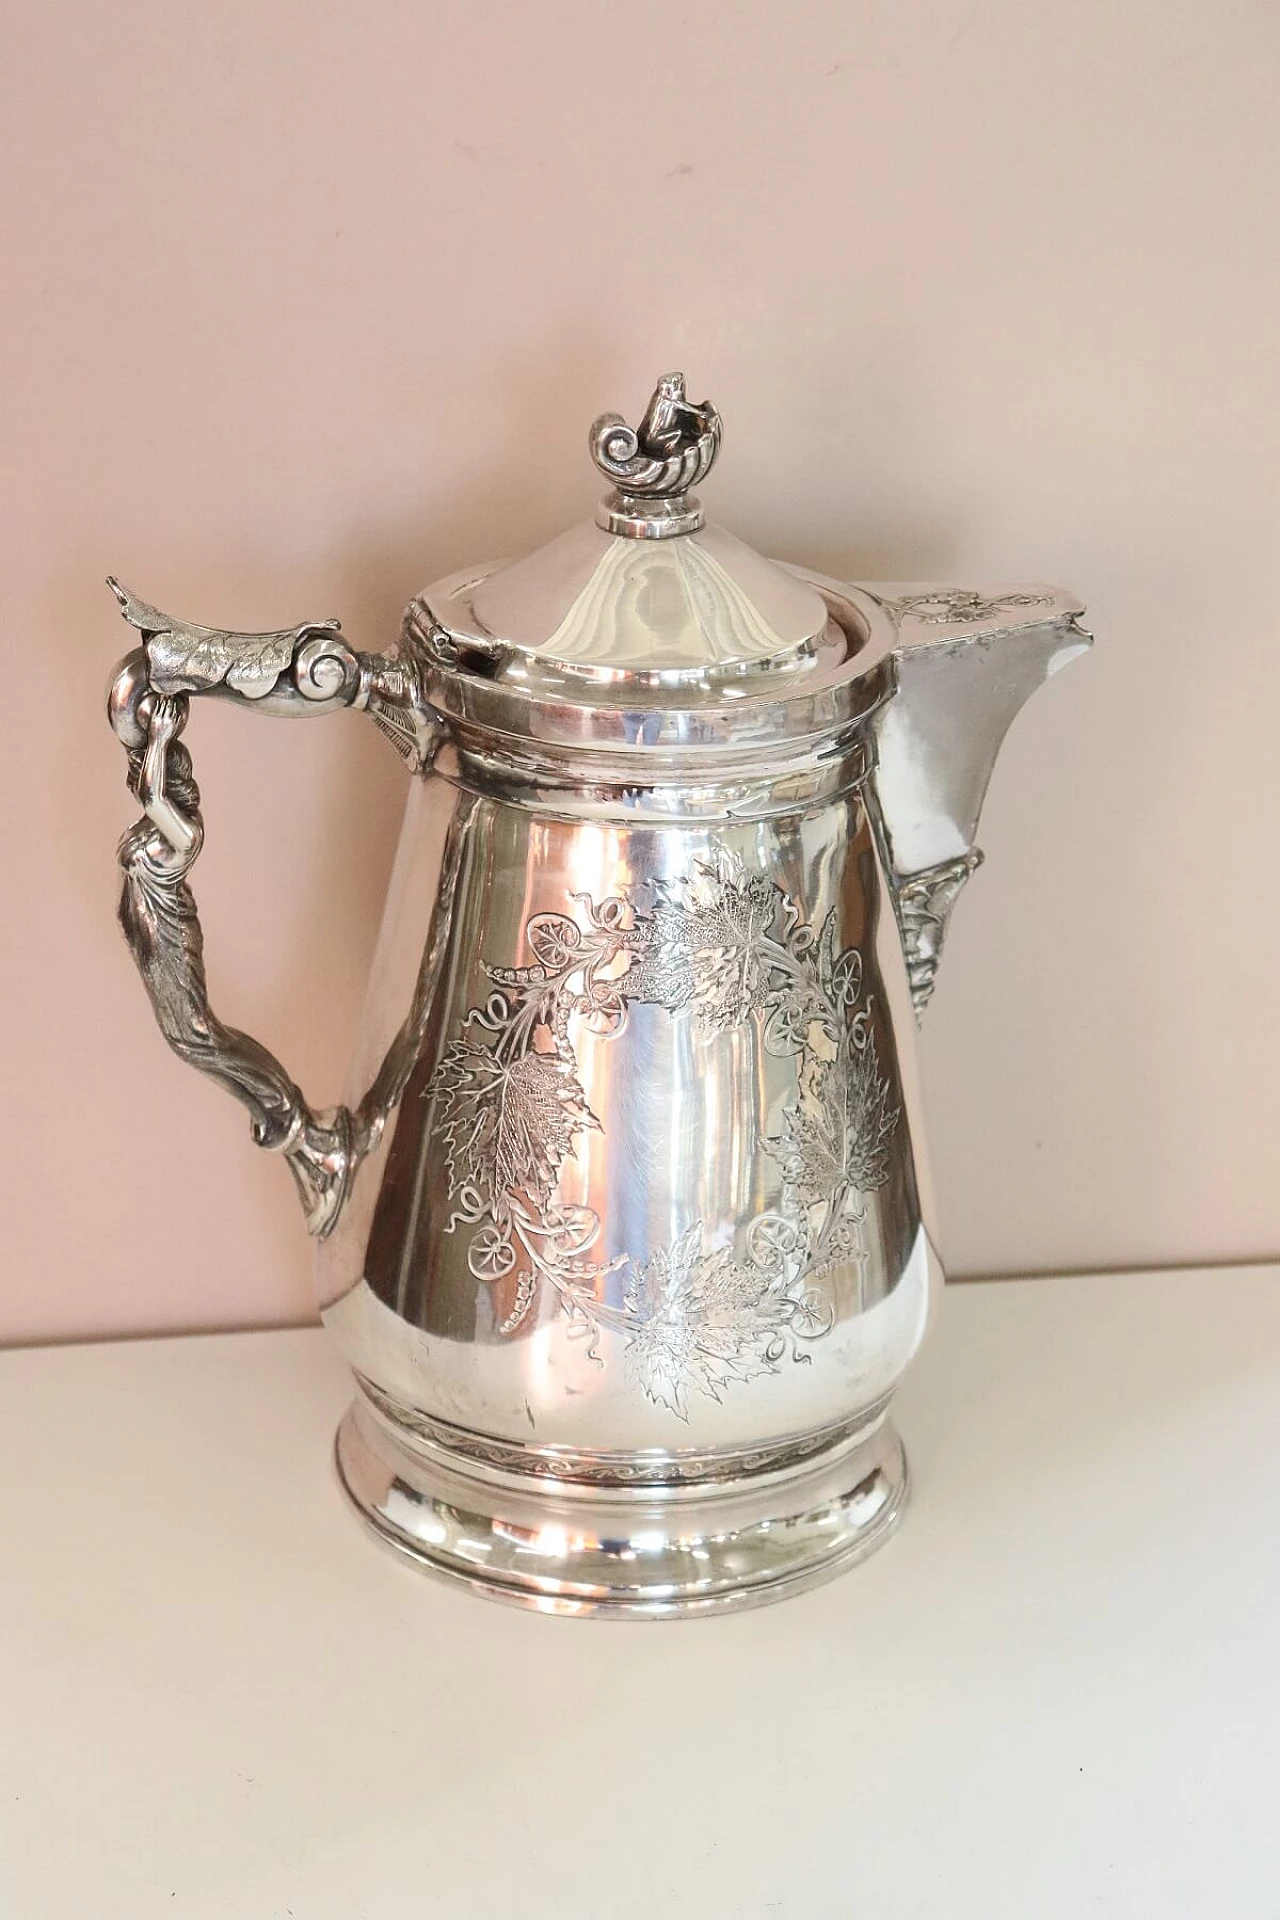 Antique silver plated pitcher by Wilcox, 1868 1067049